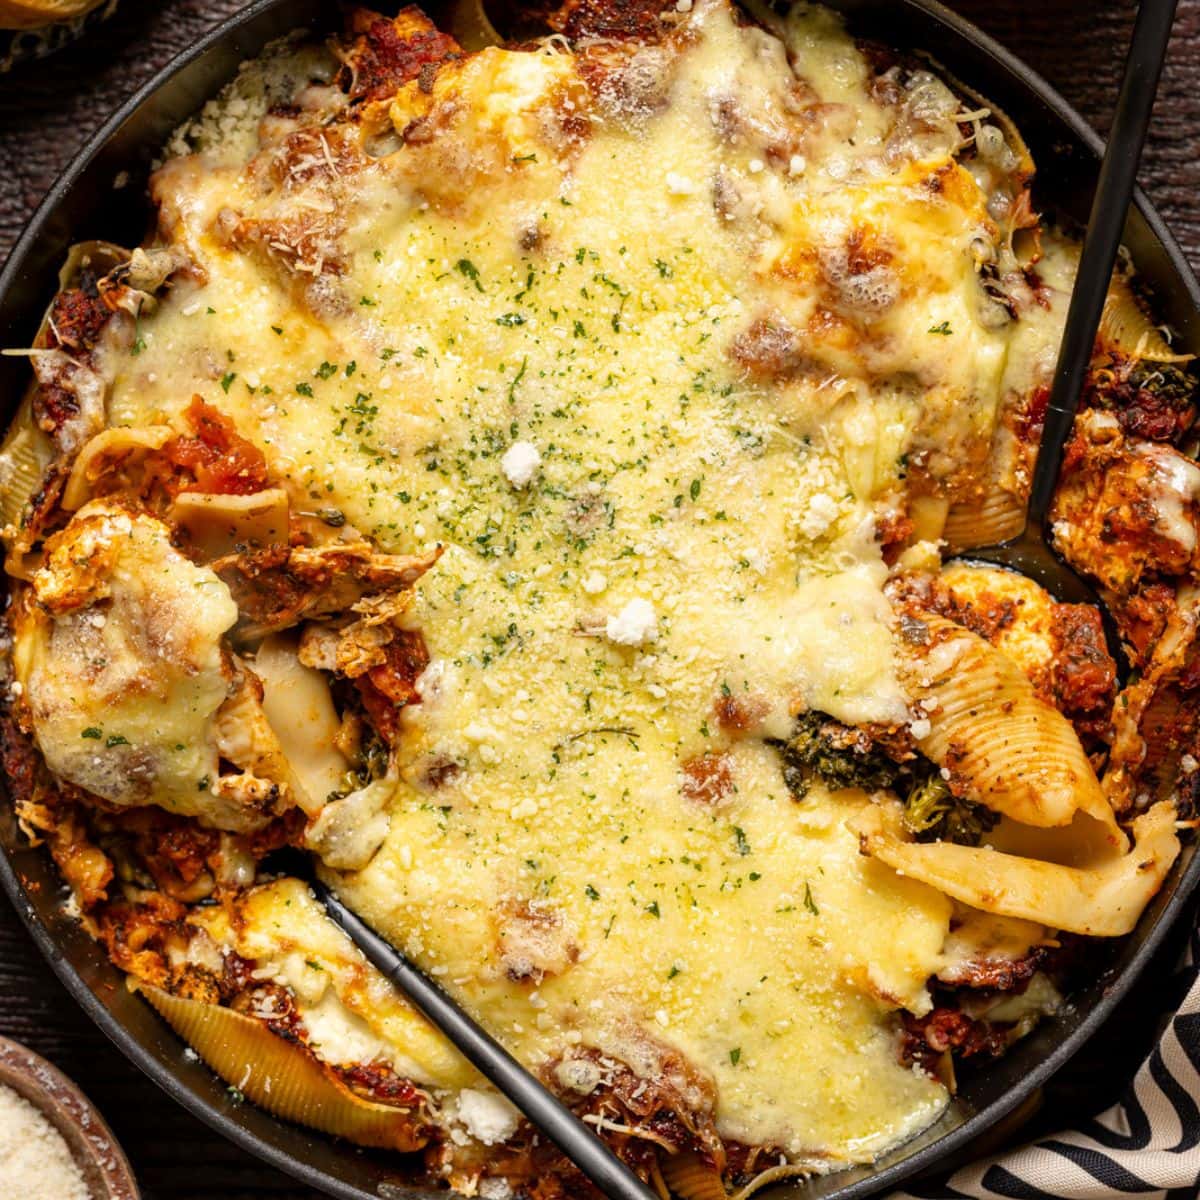 Stuffed shells scooped with two spoons in a skillet.